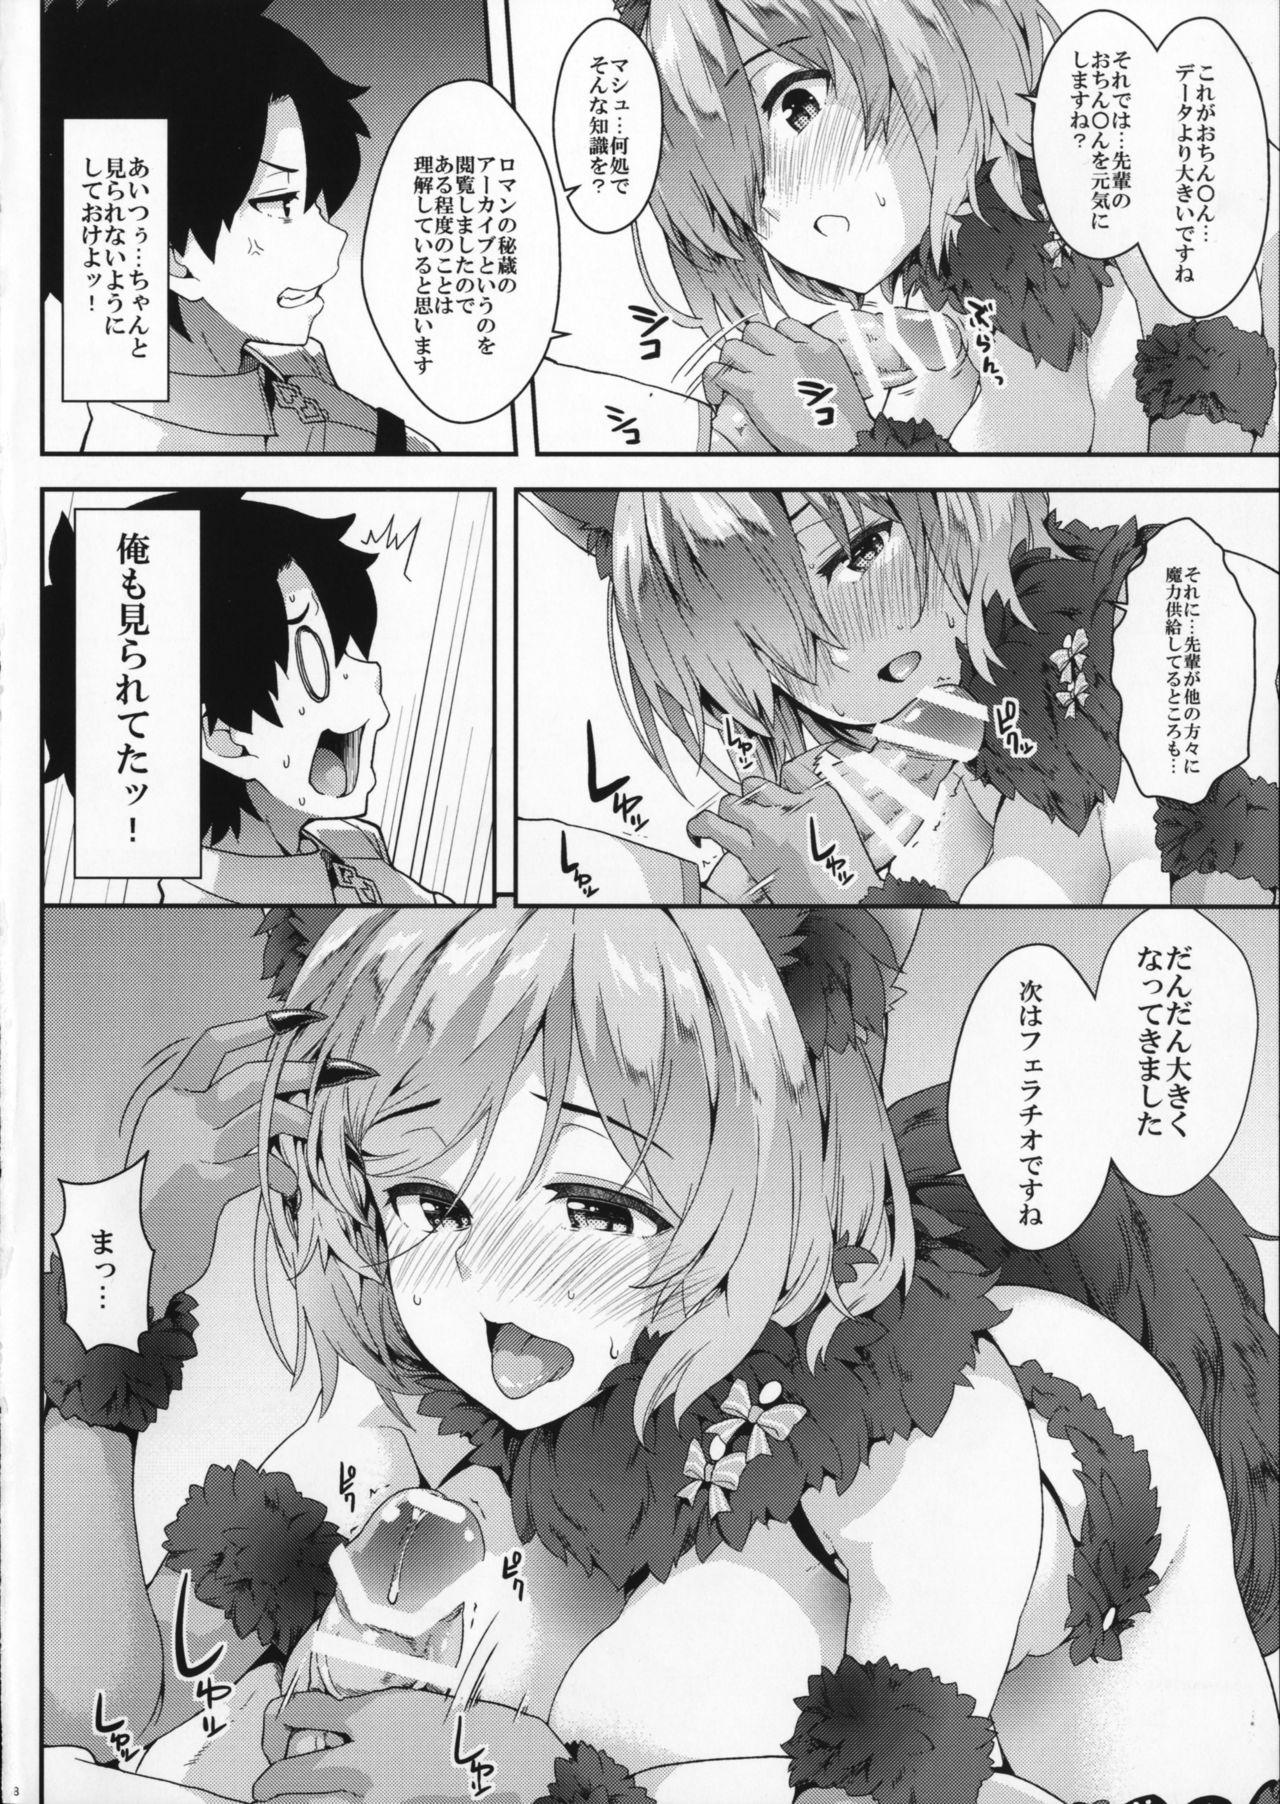 Hot Naked Girl Why am I jealous of you? - Fate grand order Fantasy Massage - Page 7